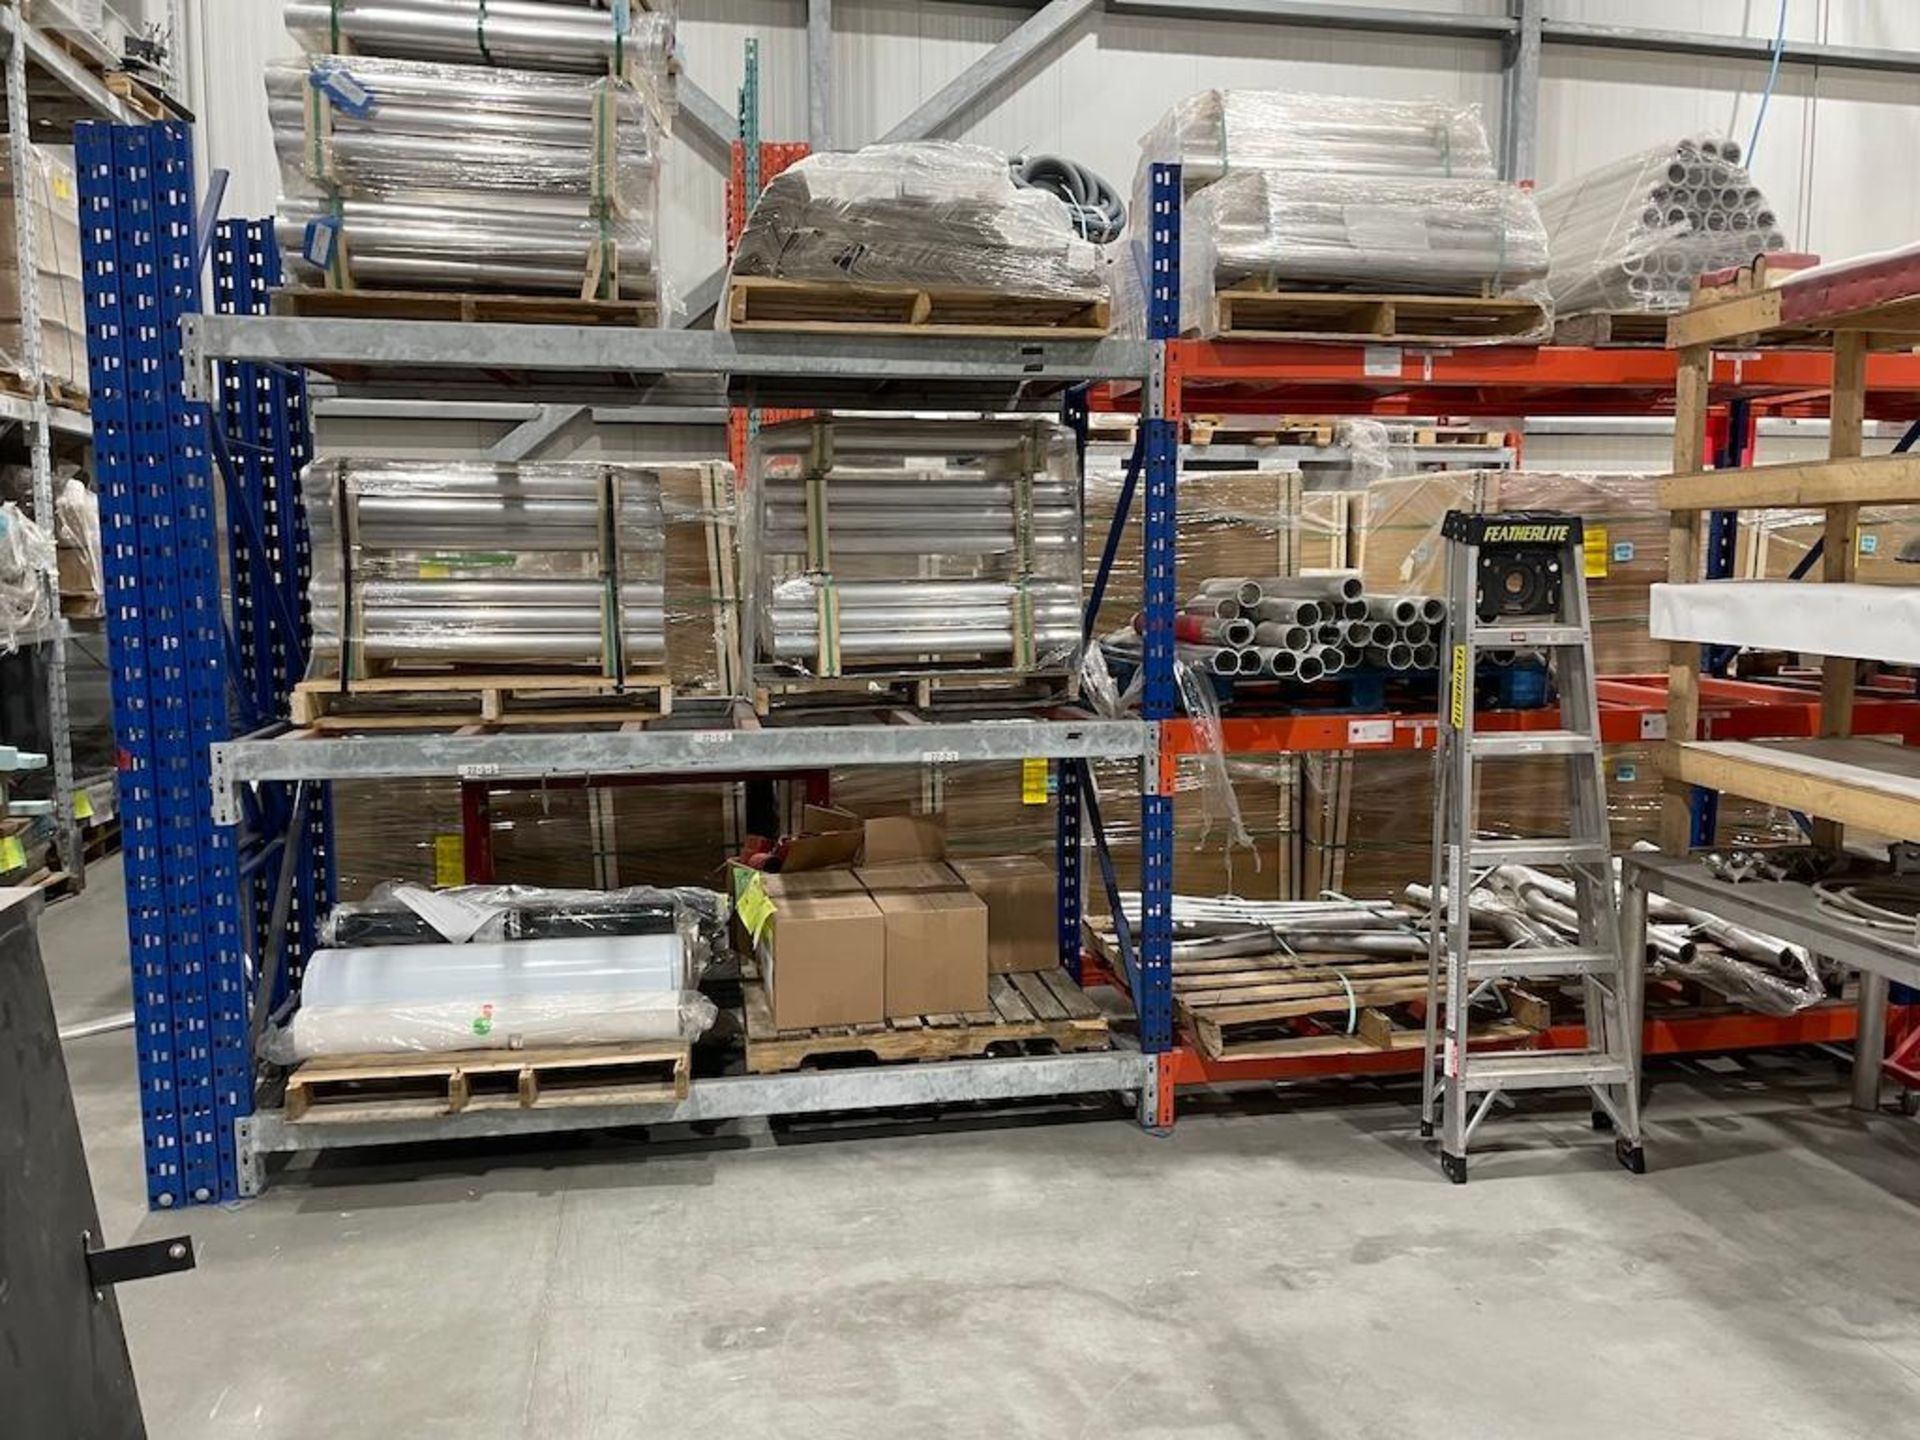 LOT ASSORTED ADJUSTABLE PALLET RACKING THROUGHOUT, APPROXIMATELY 47 SECTIONS [TROIS RIVIERES]*PLEASE - Image 13 of 16